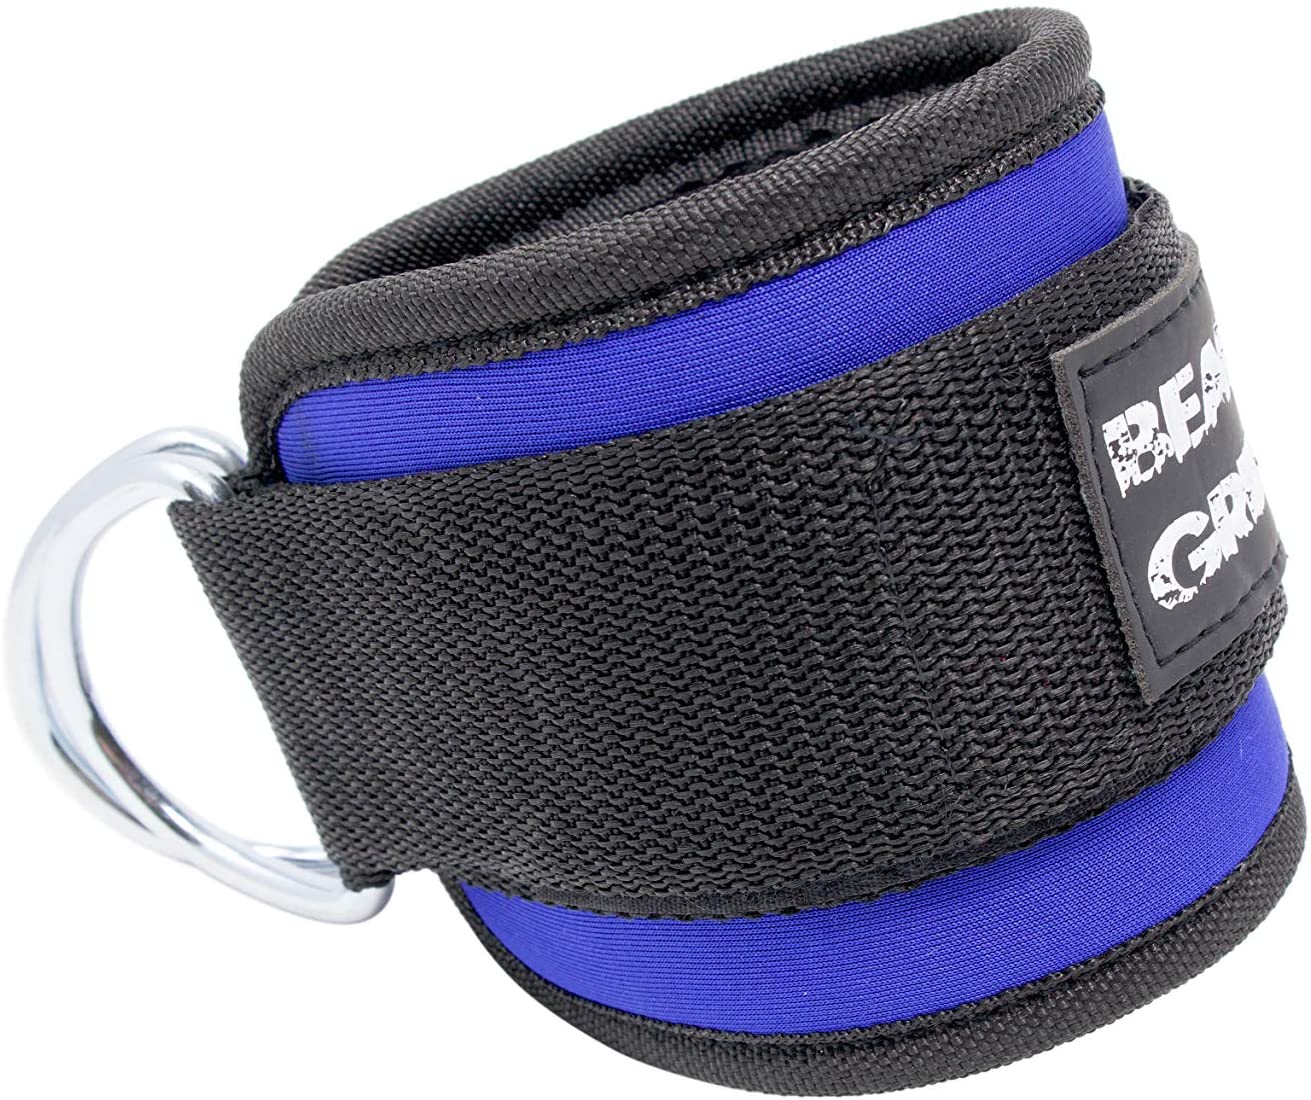 BEAR GRIP - Ankle Straps for Cables (Pairs) - Strong Closure, Double Stainless Steel D-Ring, Adjustable Neoprene - Premium Ankle Cuffs to Enhance Abs, Glute & Leg Workouts - For Men & Women